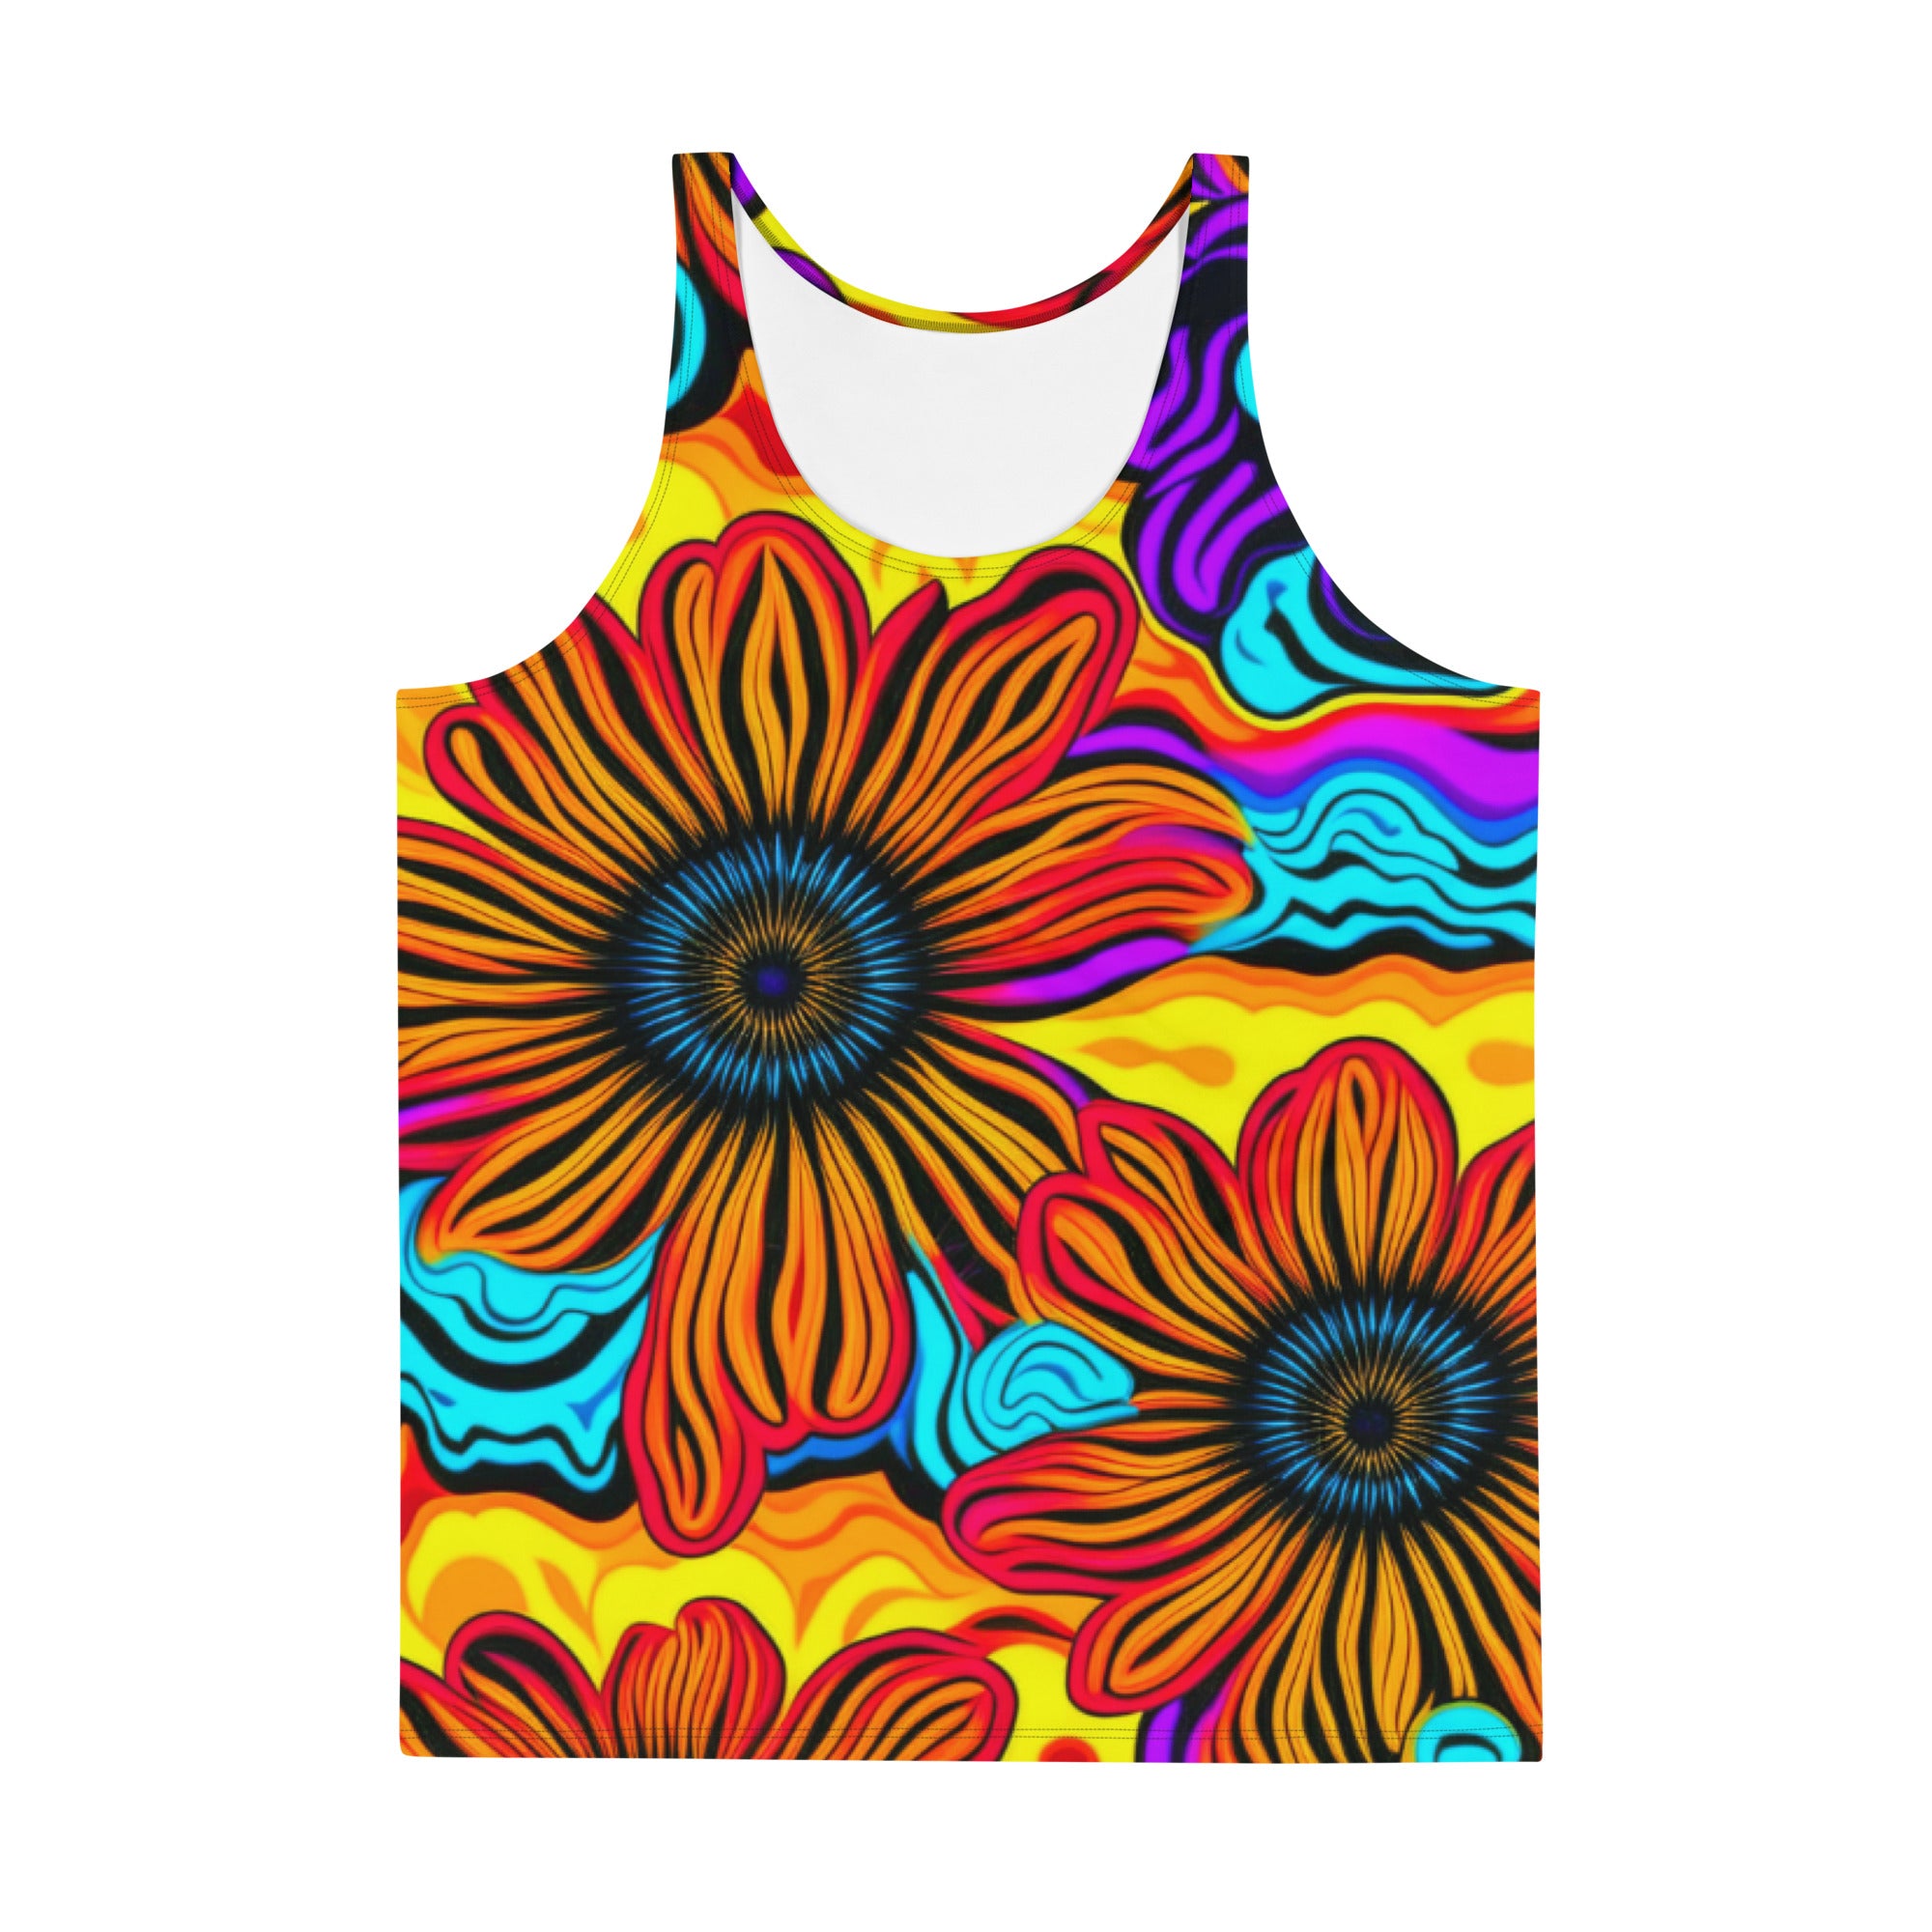 Add an electrifying touch to your rave outfit with our TRIPPY DAISY TANK TOP for men. Made with high-quality materials, it offers both comfort and style. Perfect for any music festival, it will keep you looking and feeling cool all night long.